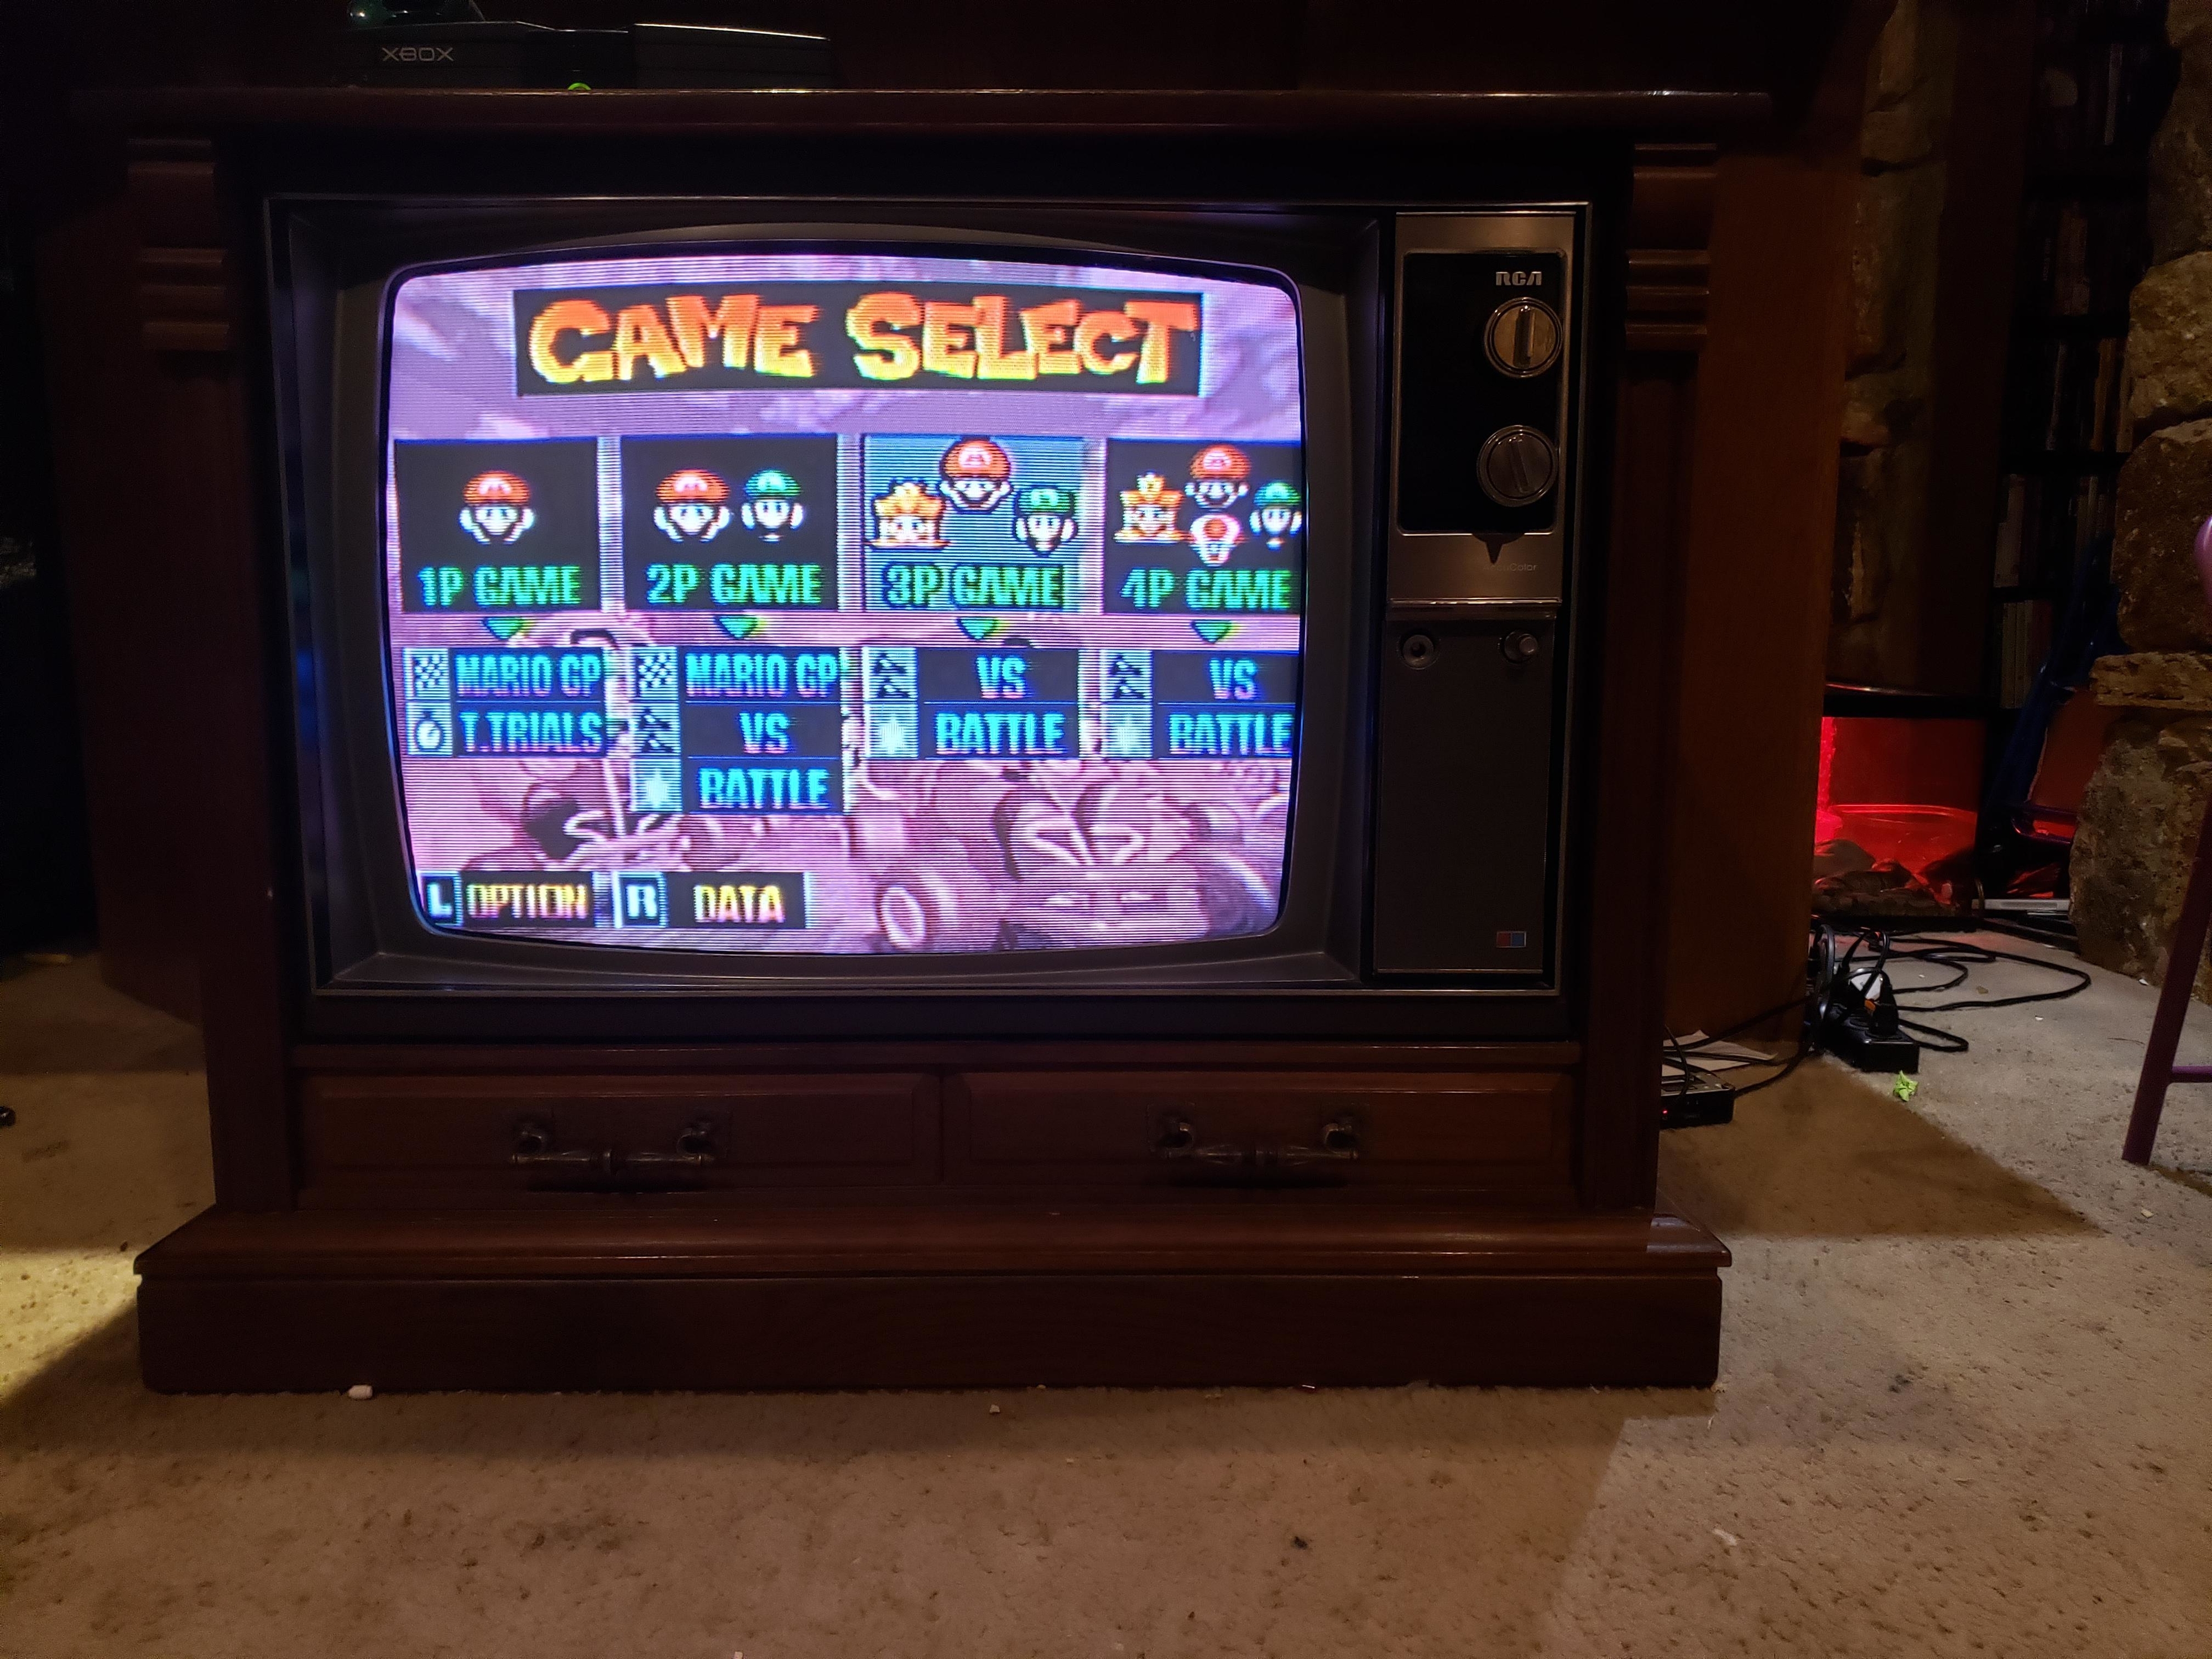 Vintage TV displaying the Mario Kart 64 game menu on a screen with selectable options for gameplay modes